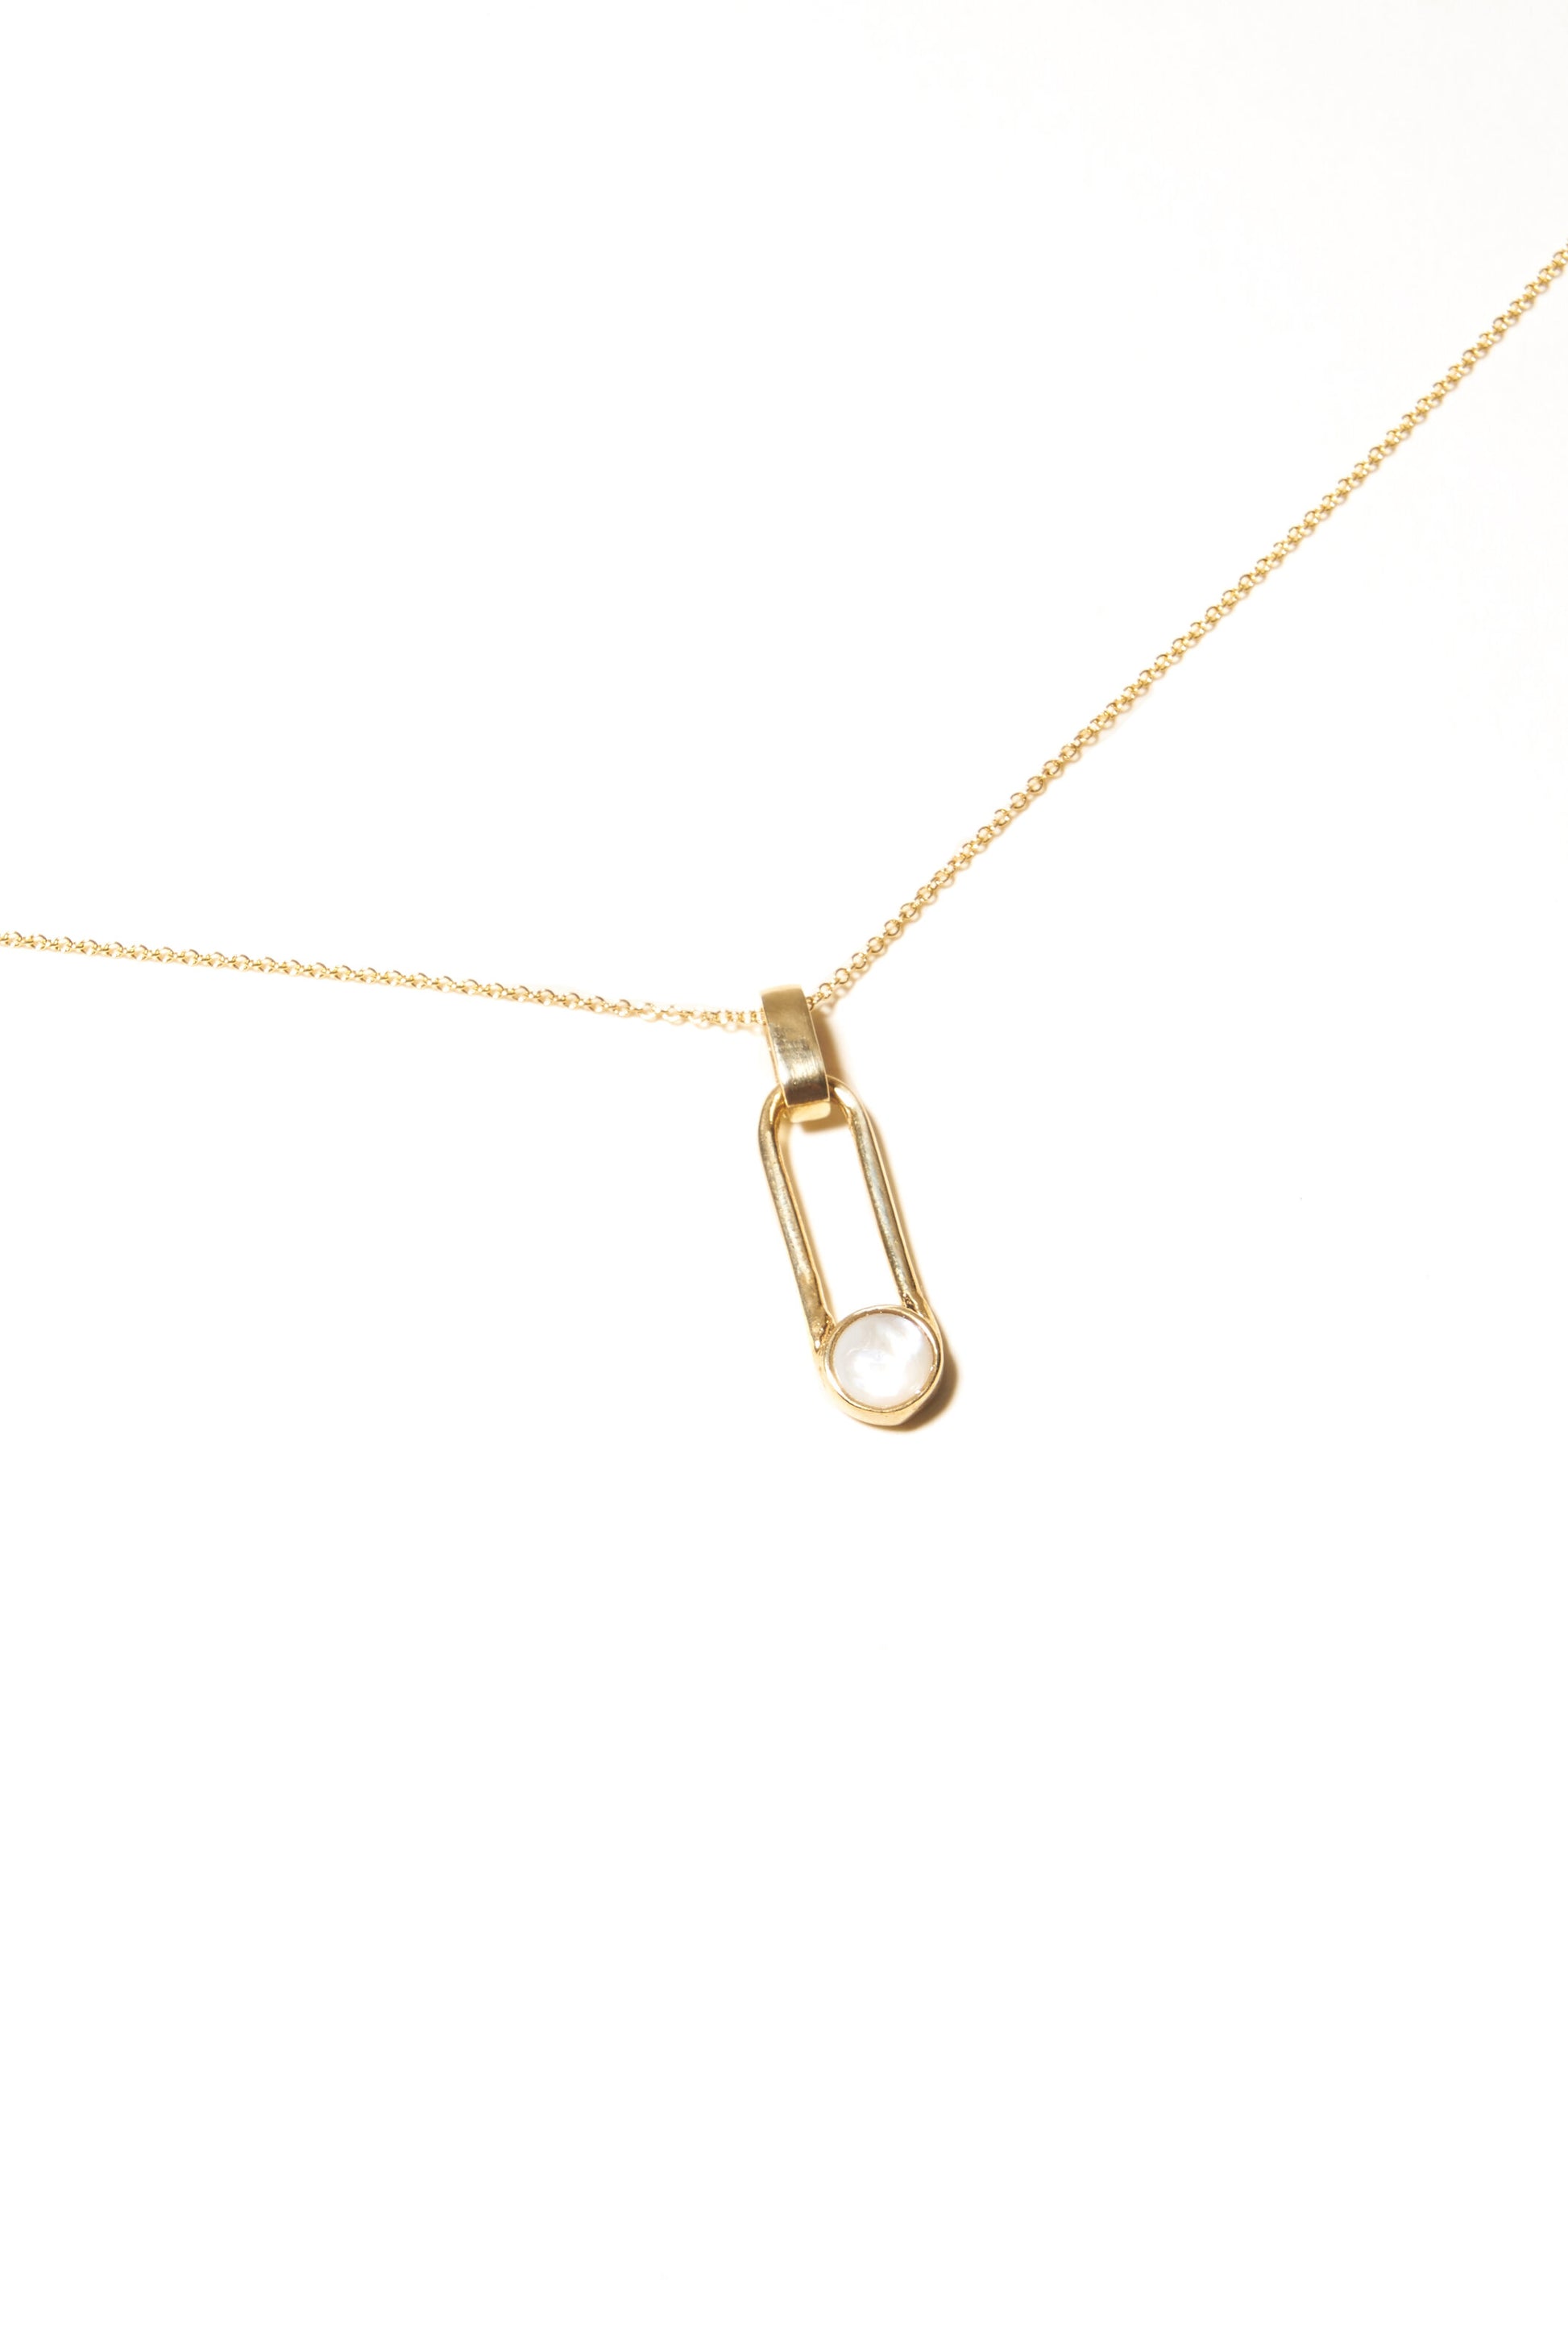 ODETTE_NY_Aura_Minimal_Pendant_Necklac_Mother_of_Pearl_Accent_on_GOLDFILL_CHAIN_Handmade_in_USA_Jewelry